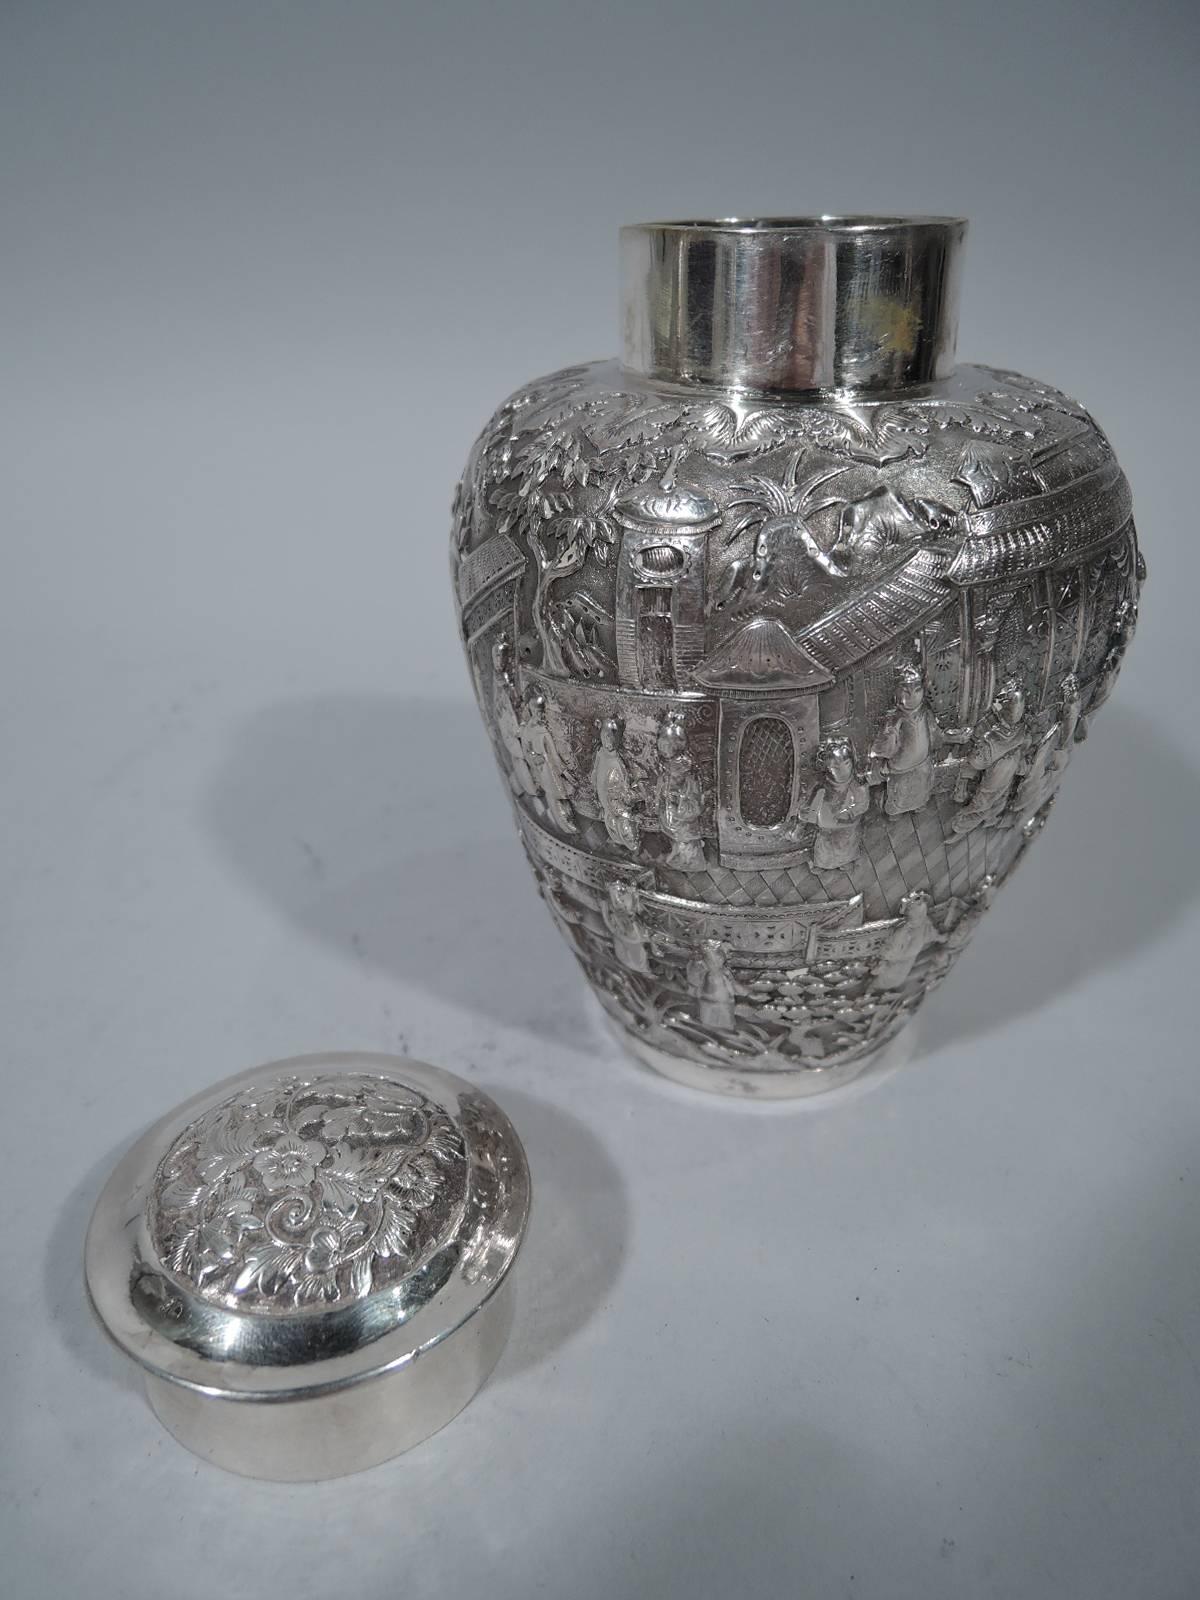 19th Century Antique Chinese Export Silver Tea Caddy by Hung Chong